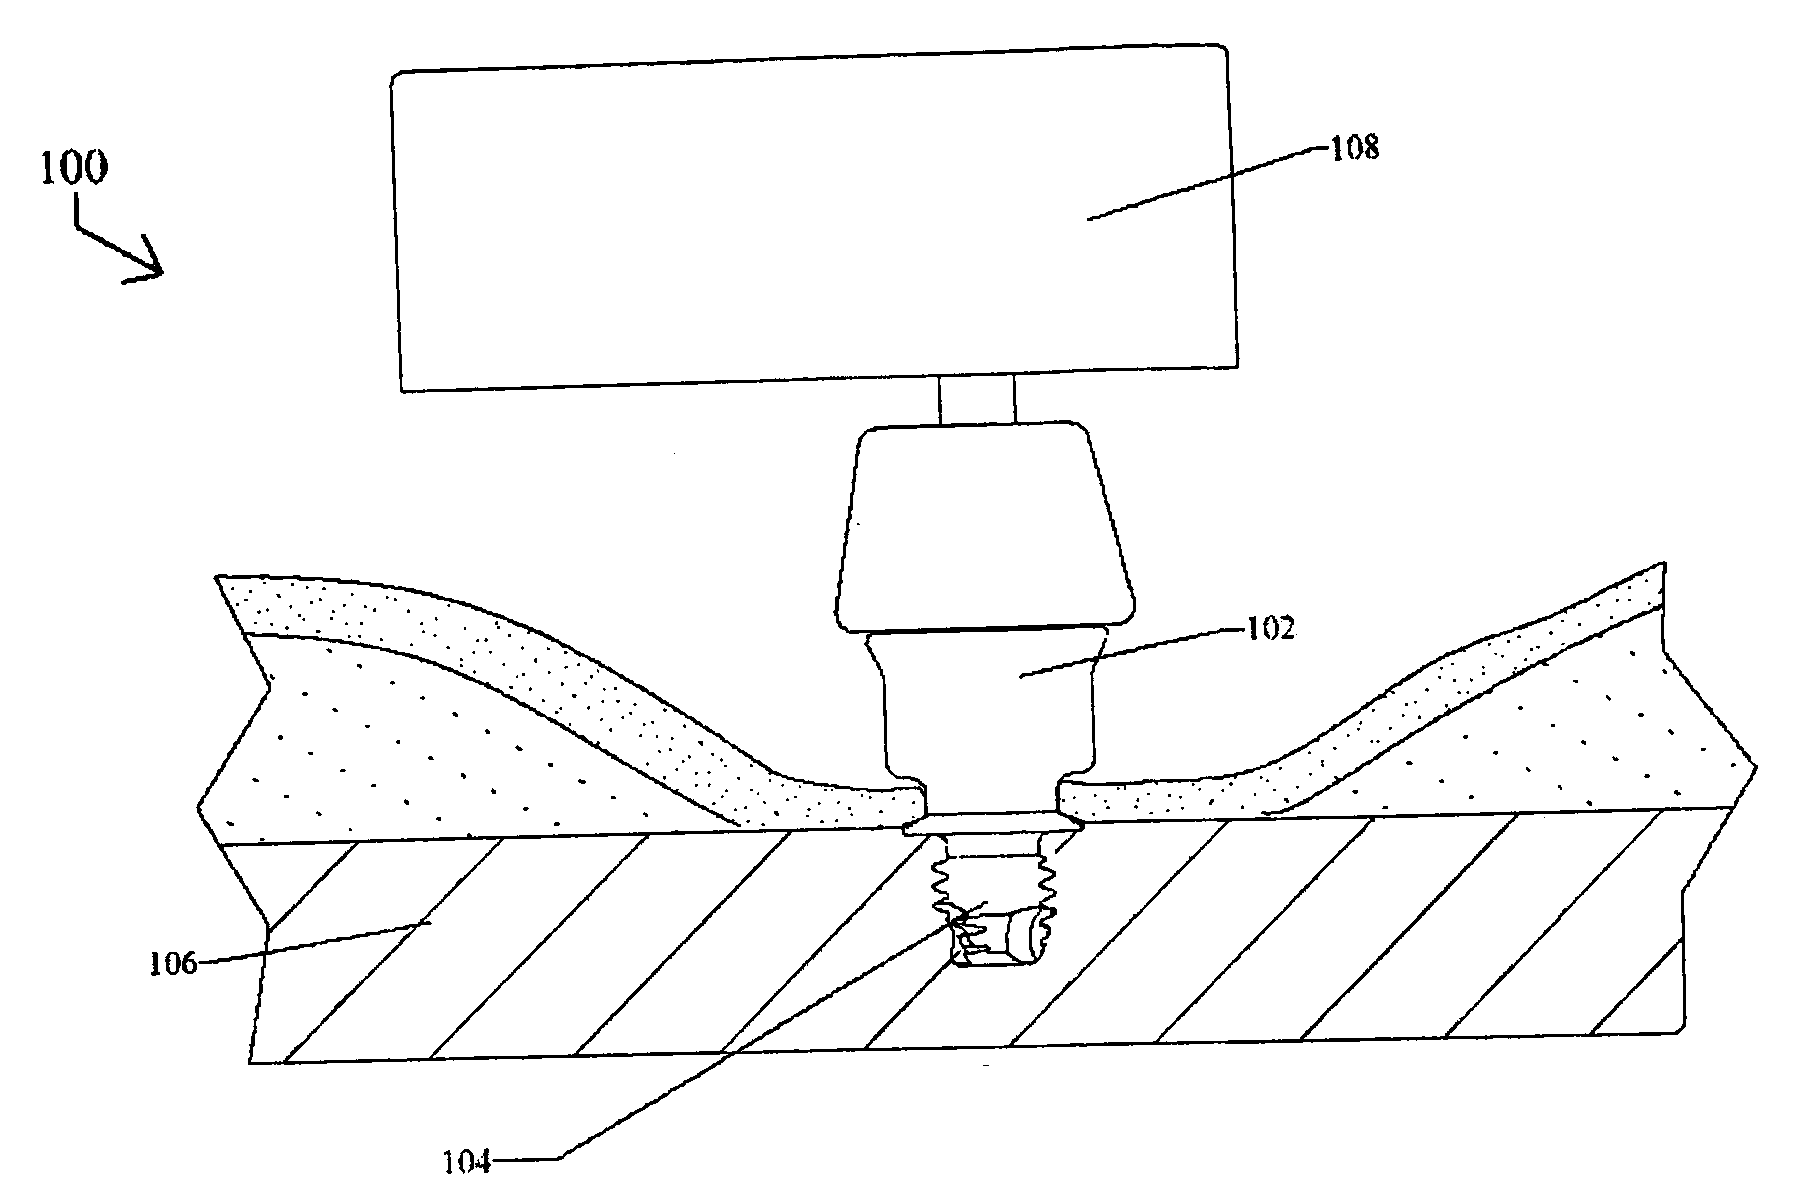 Hearing-aid anchoring element